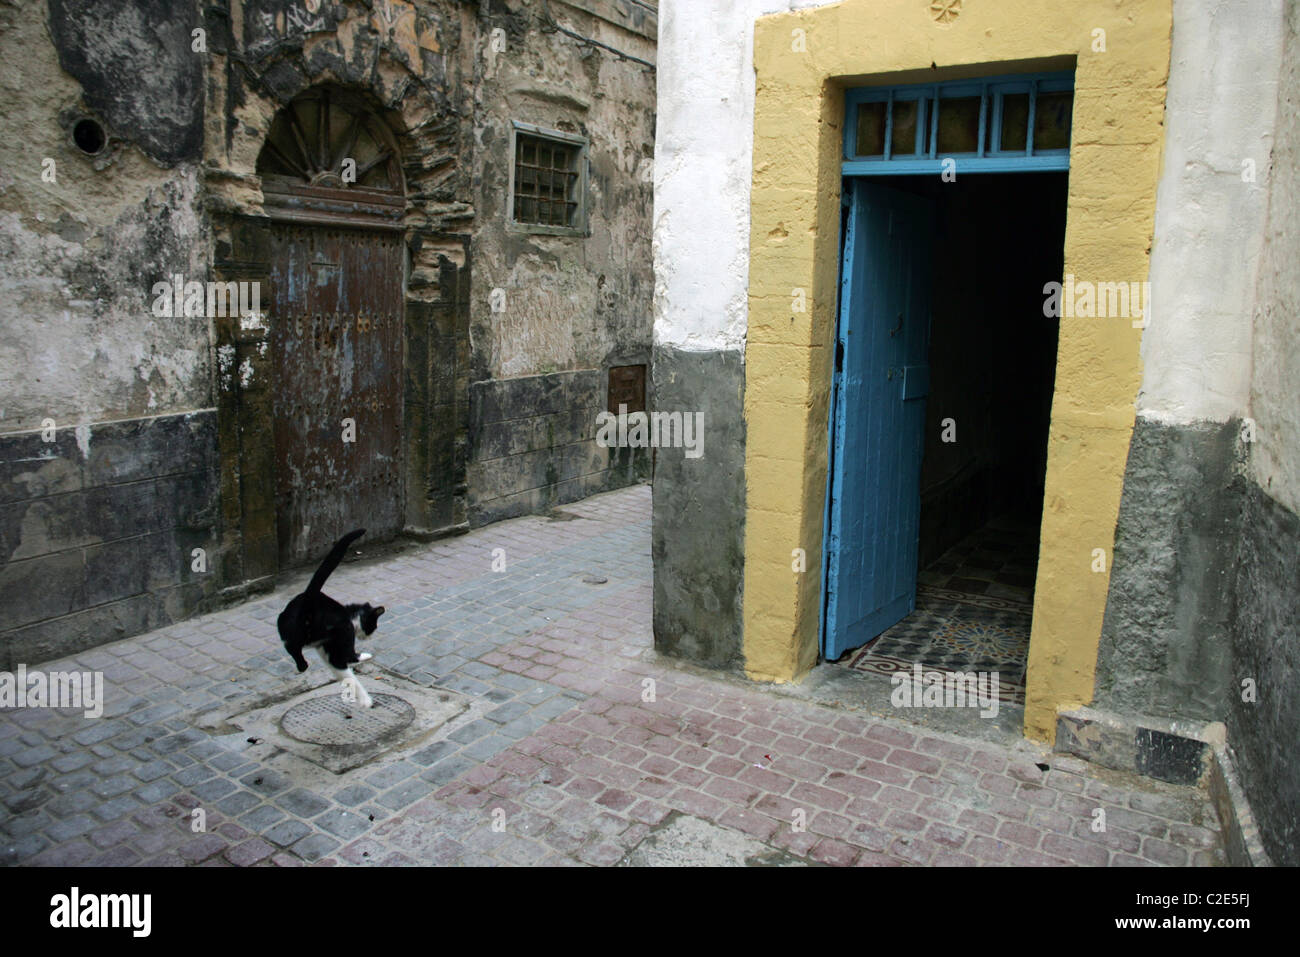 A cat playing with a cockroach in the Medina, Essaouira, Morocco, North Africa. Stock Photo